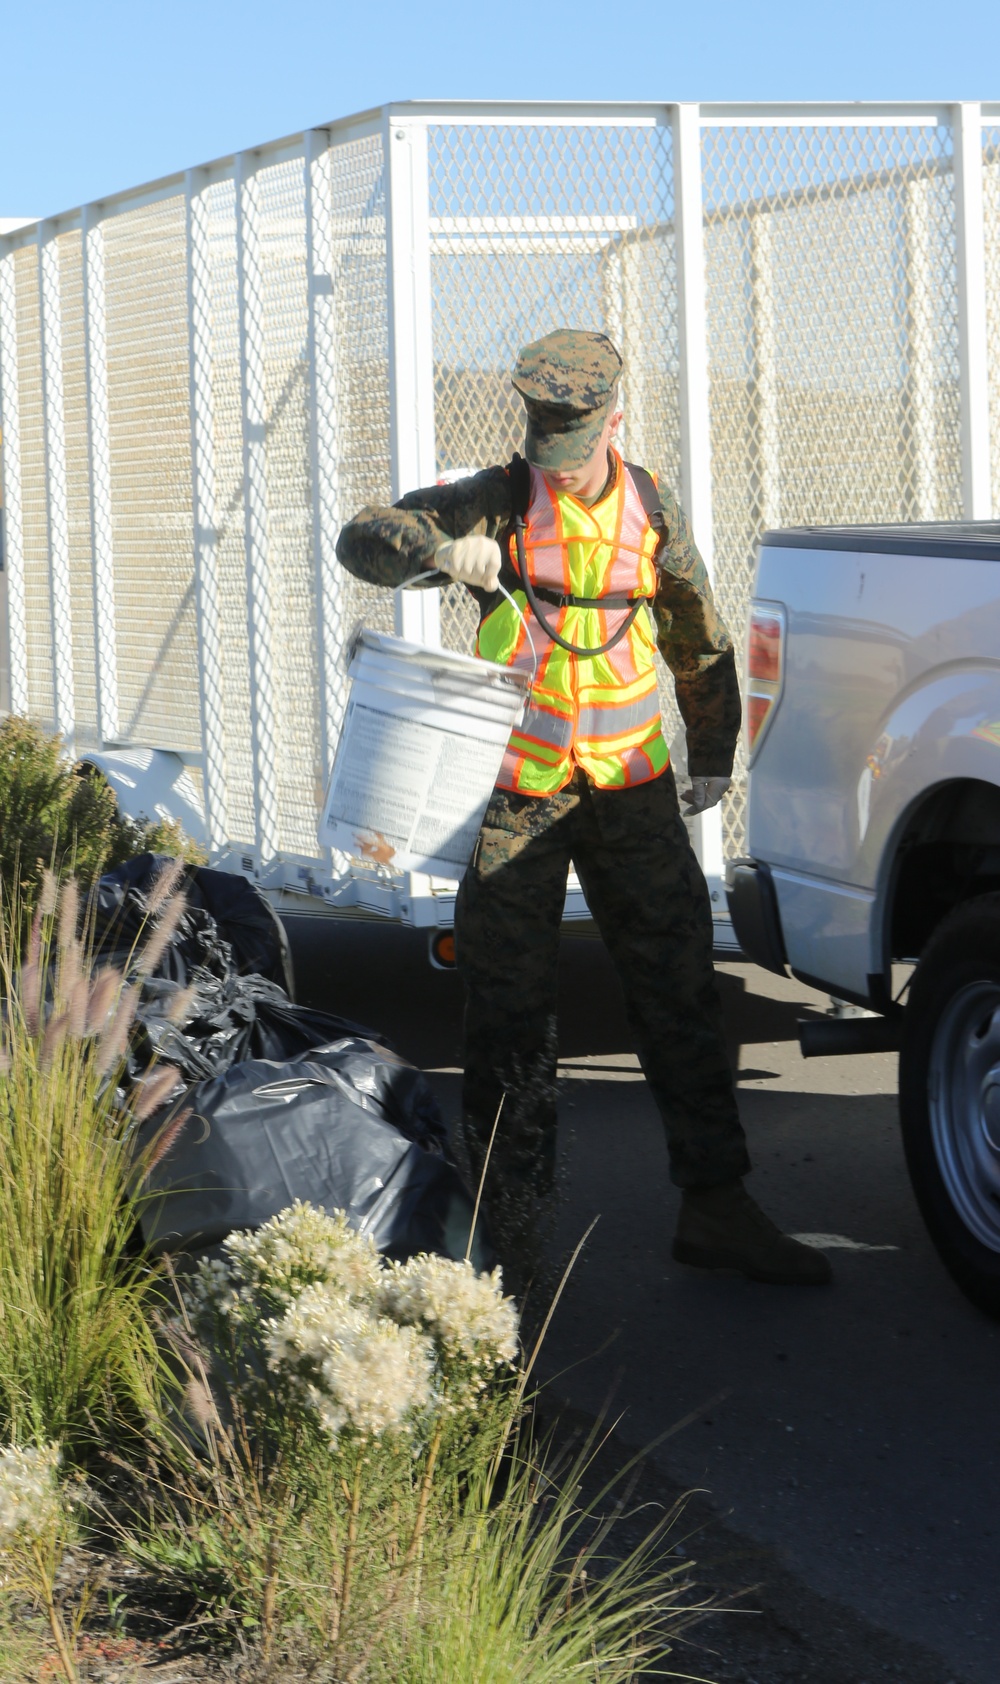 Marines participate in base-wide cleanup